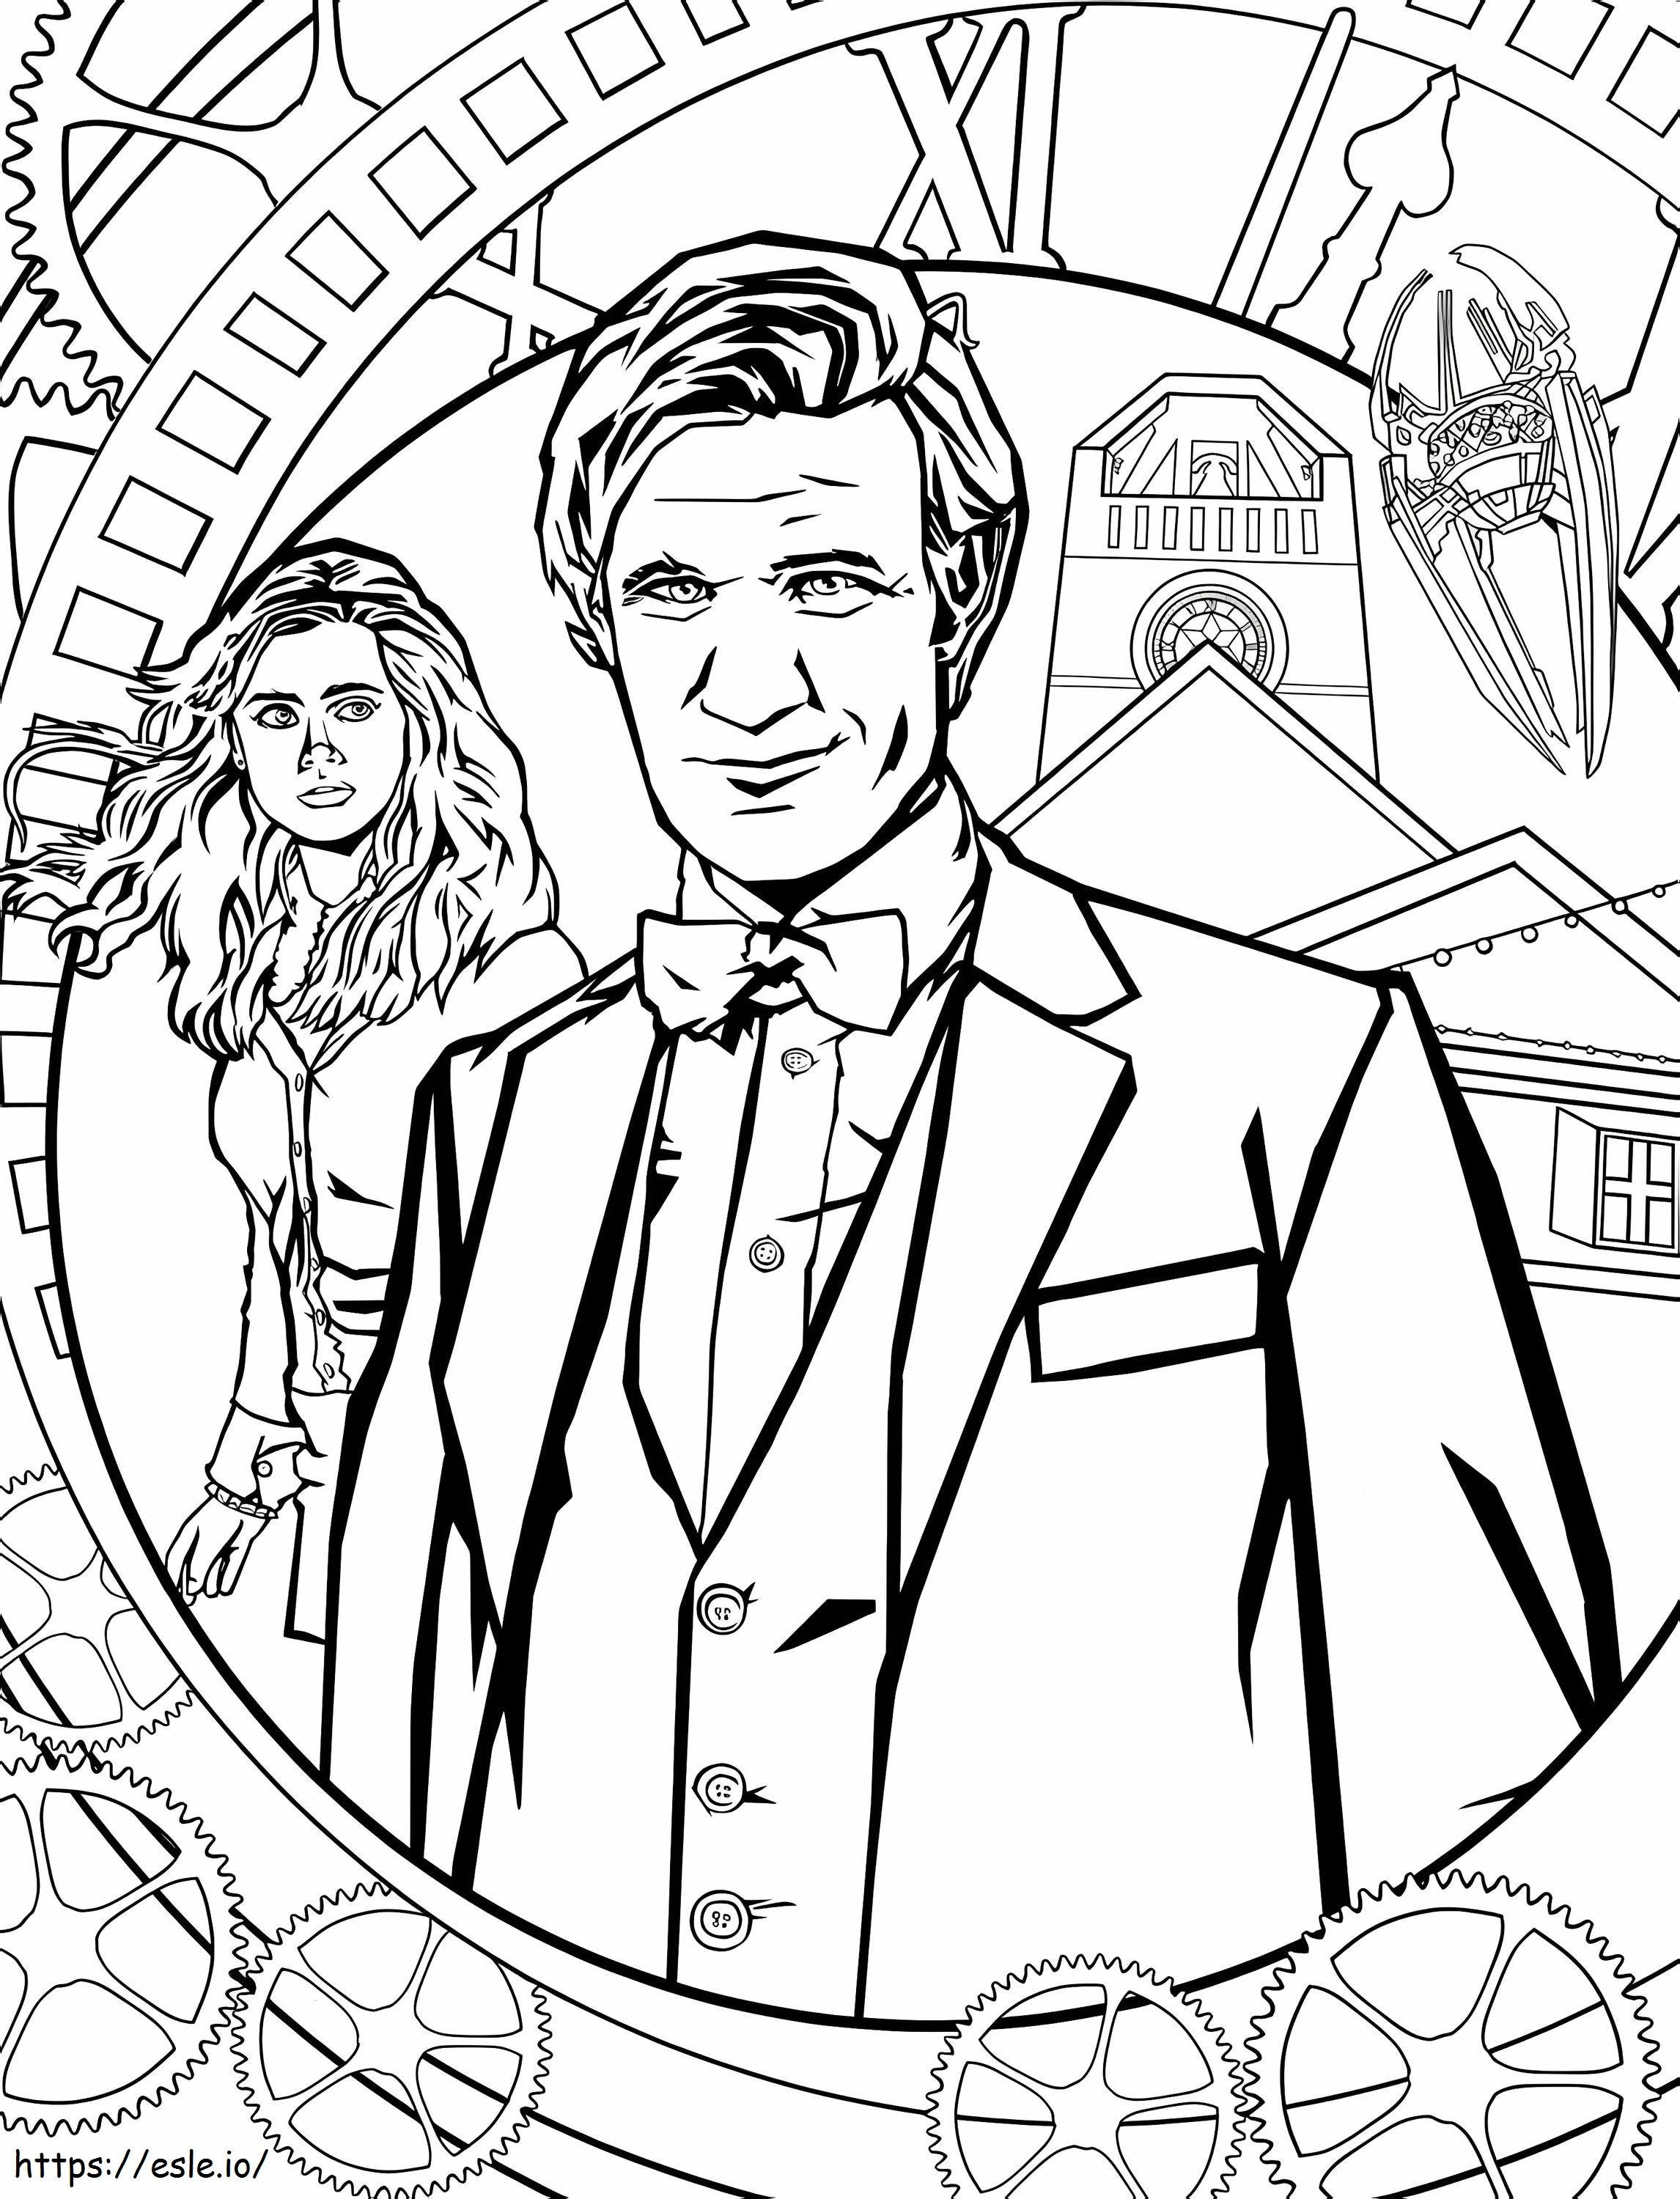 Eleventh Doctor coloring page